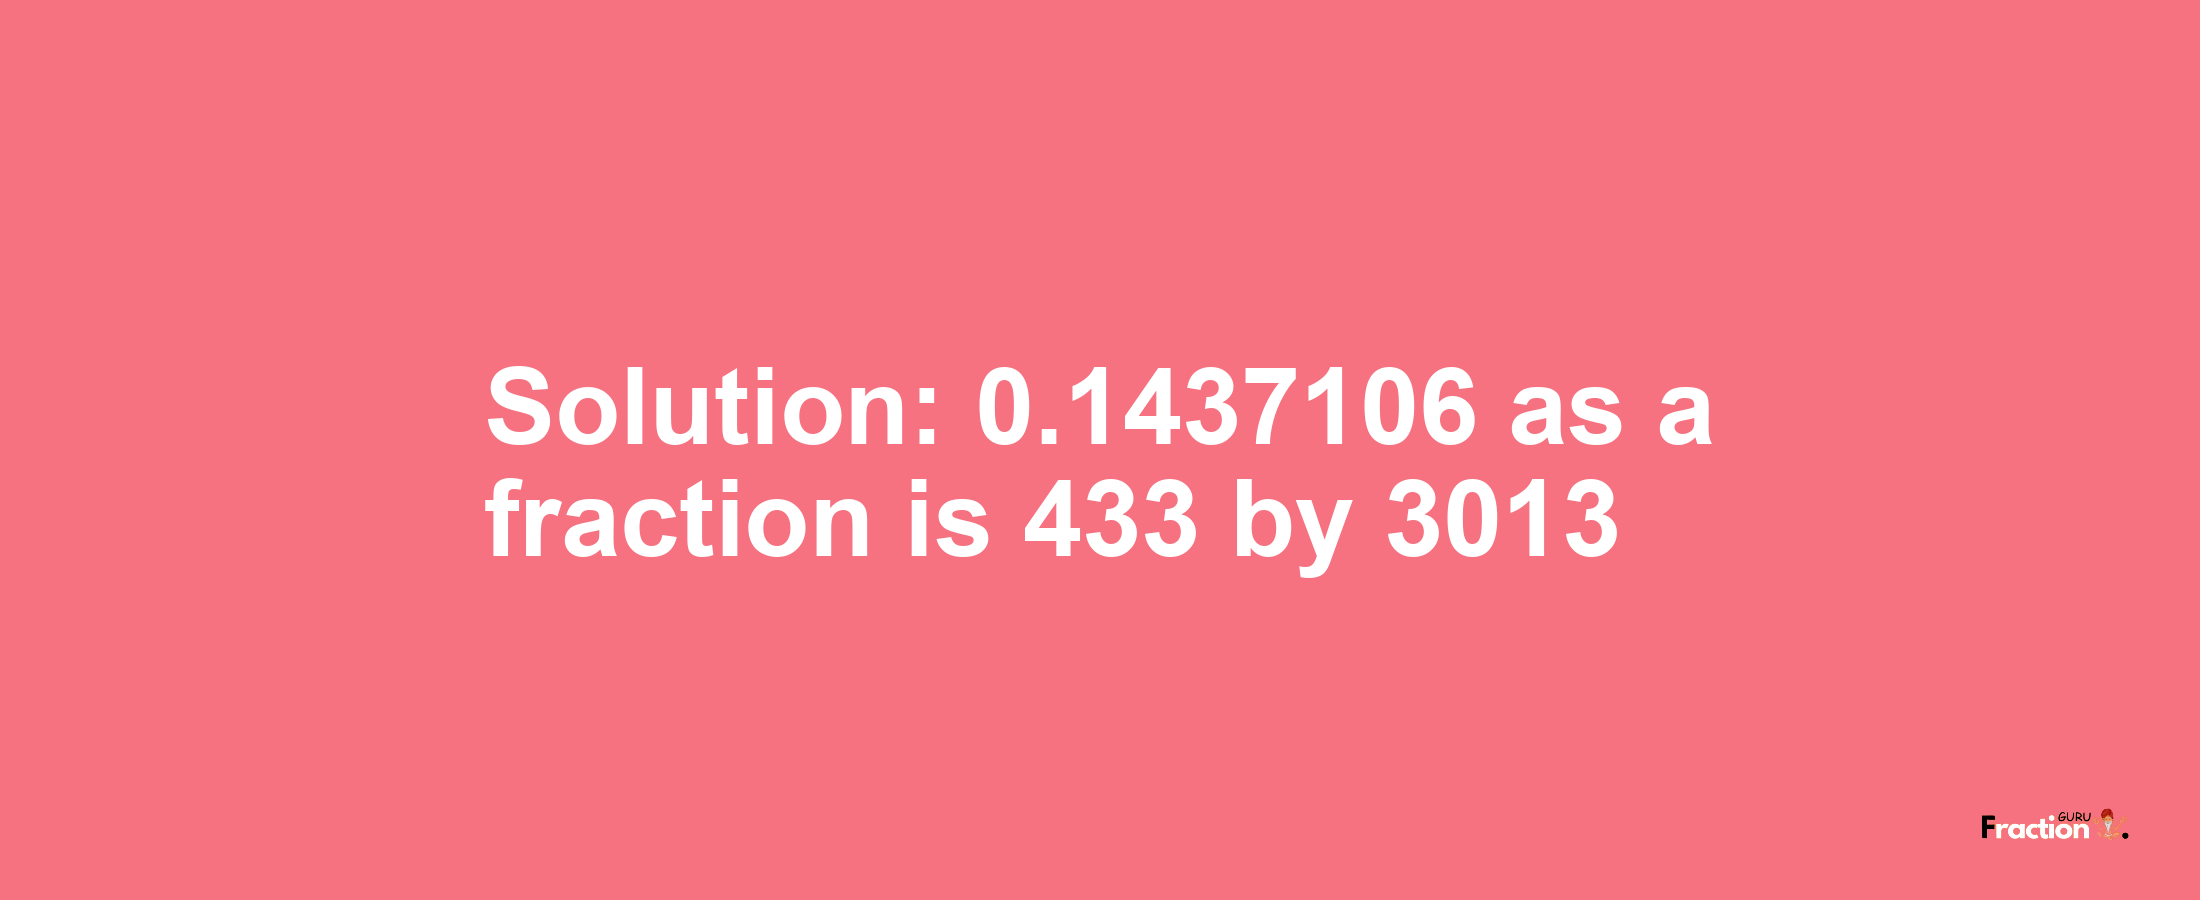 Solution:0.1437106 as a fraction is 433/3013